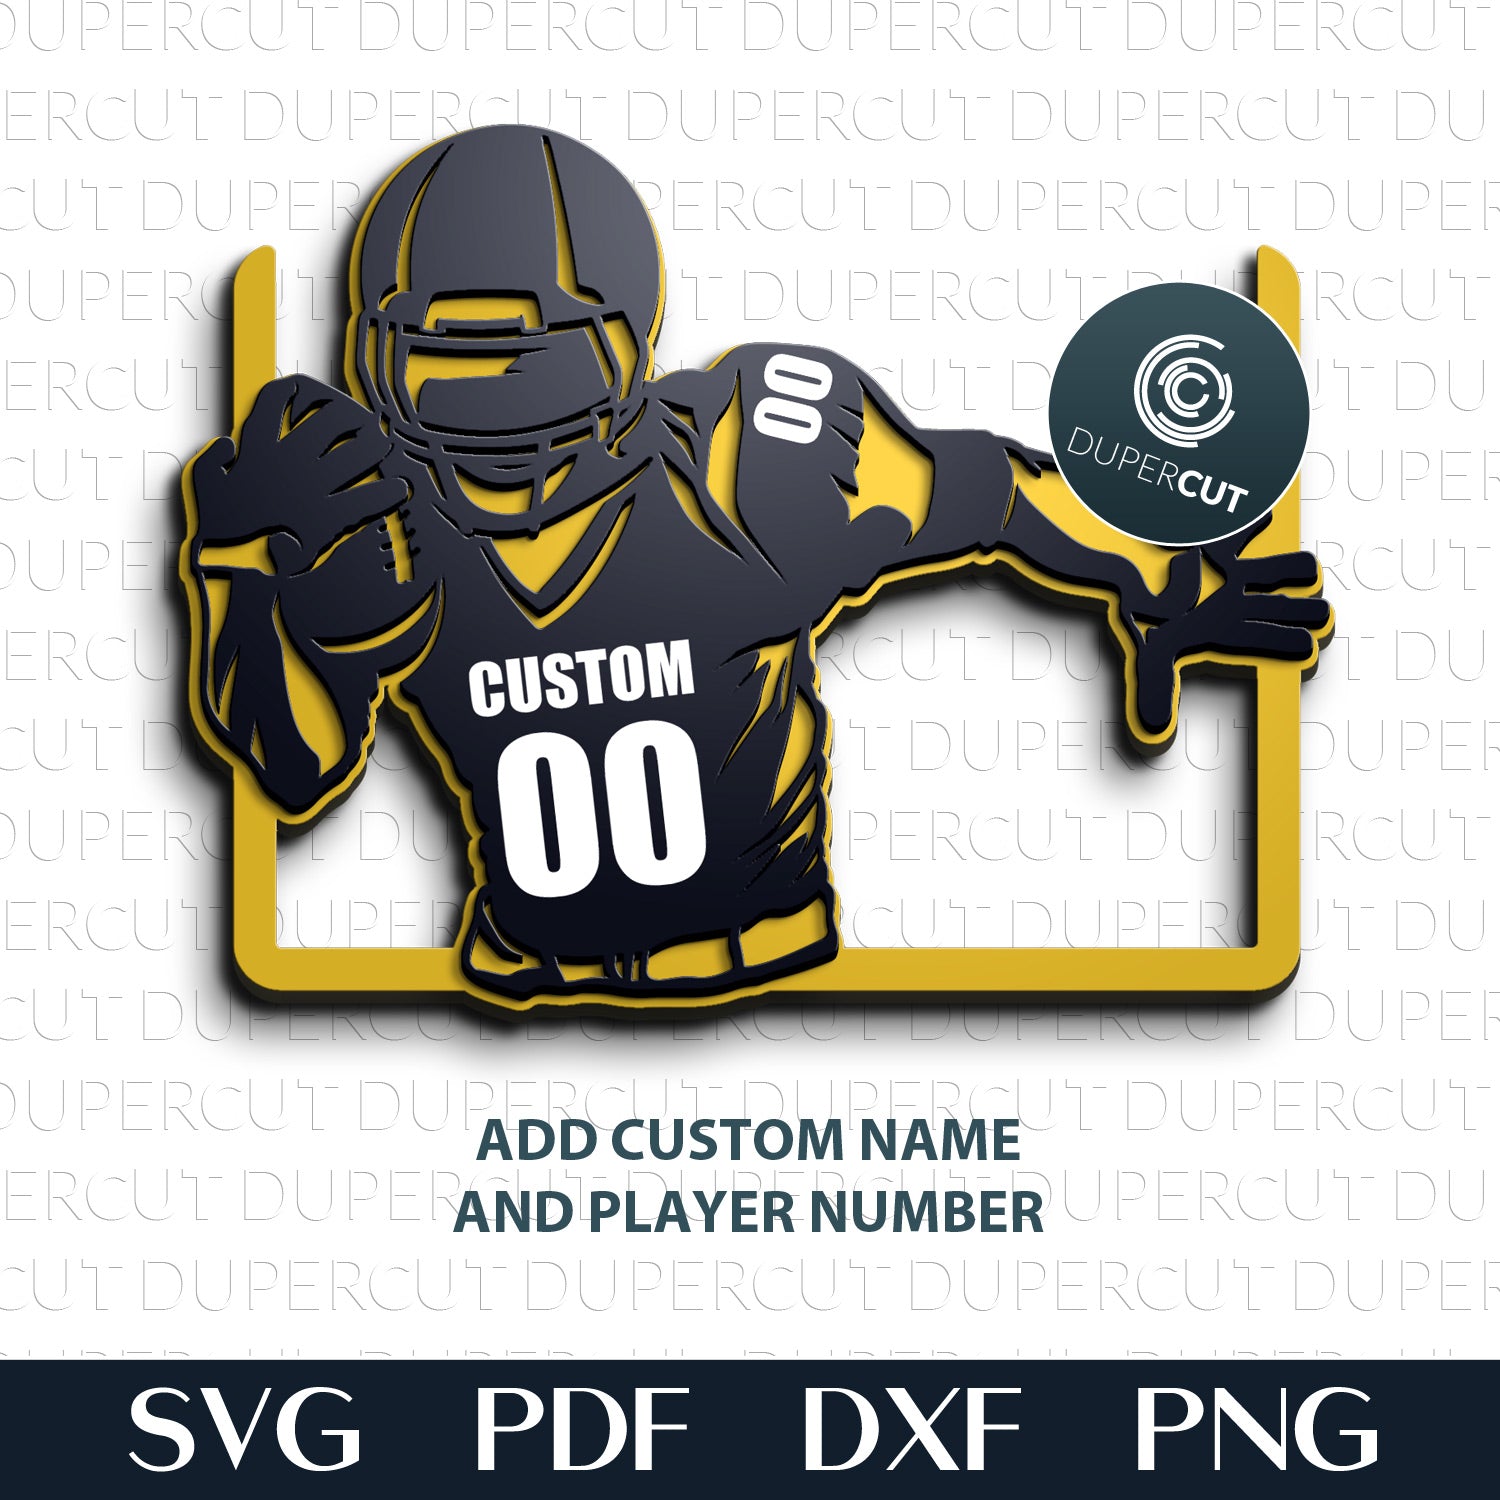 American football sign custom jersey name number - SVG DXF EPS layered cutting files for Glowforge, Cricut, Silhouette Cameo, CNC plasma machines, scroll saw pattern by www.DuperCut.com